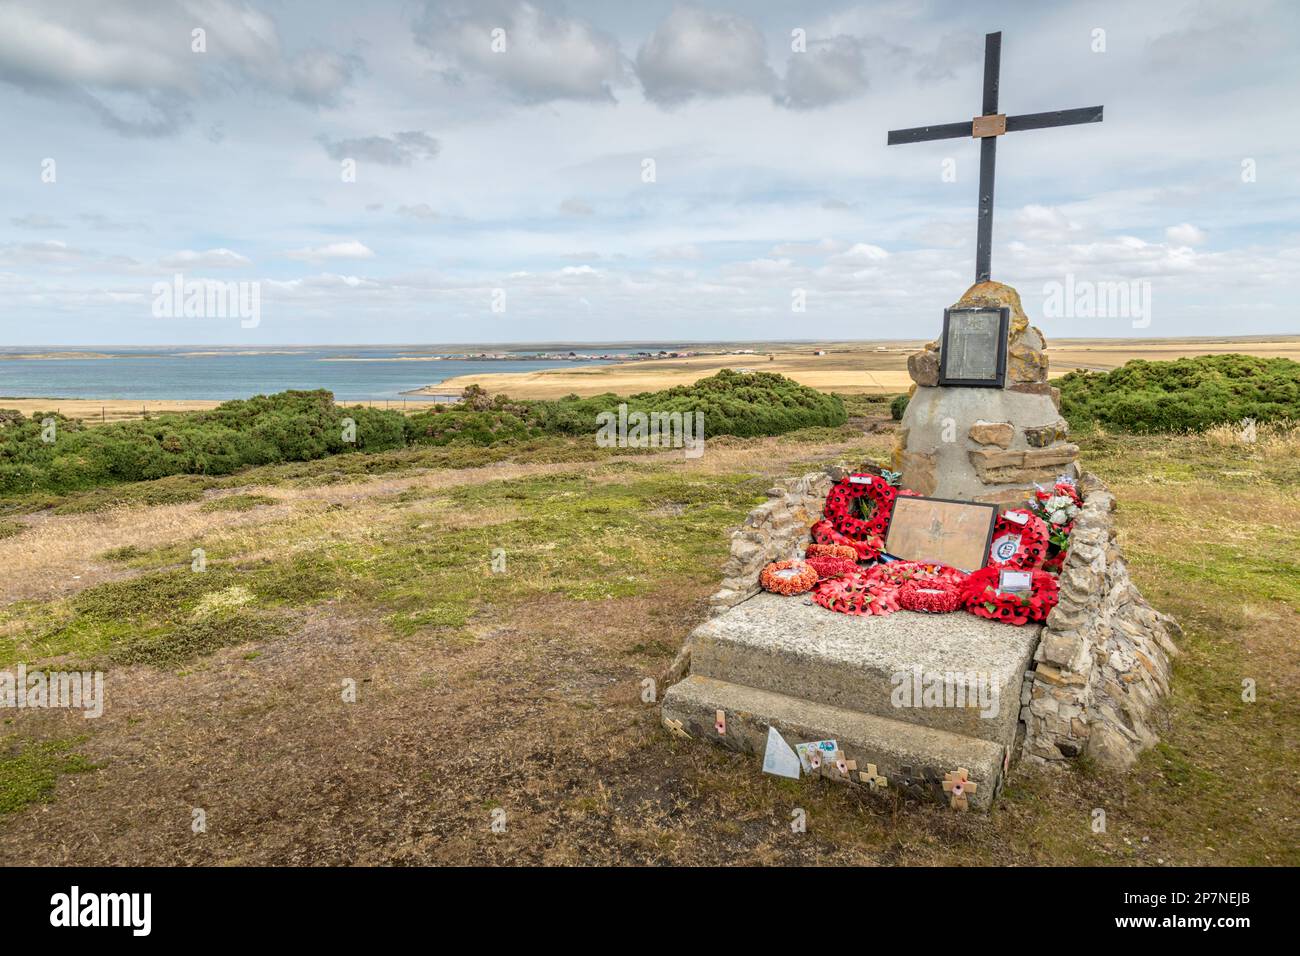 The memorial to the soldiers of 2 Para, the 2nd battalion of The Parachute Regiment, killed in The Falklands War, near Goose Green, Falkland Islands. Stock Photo